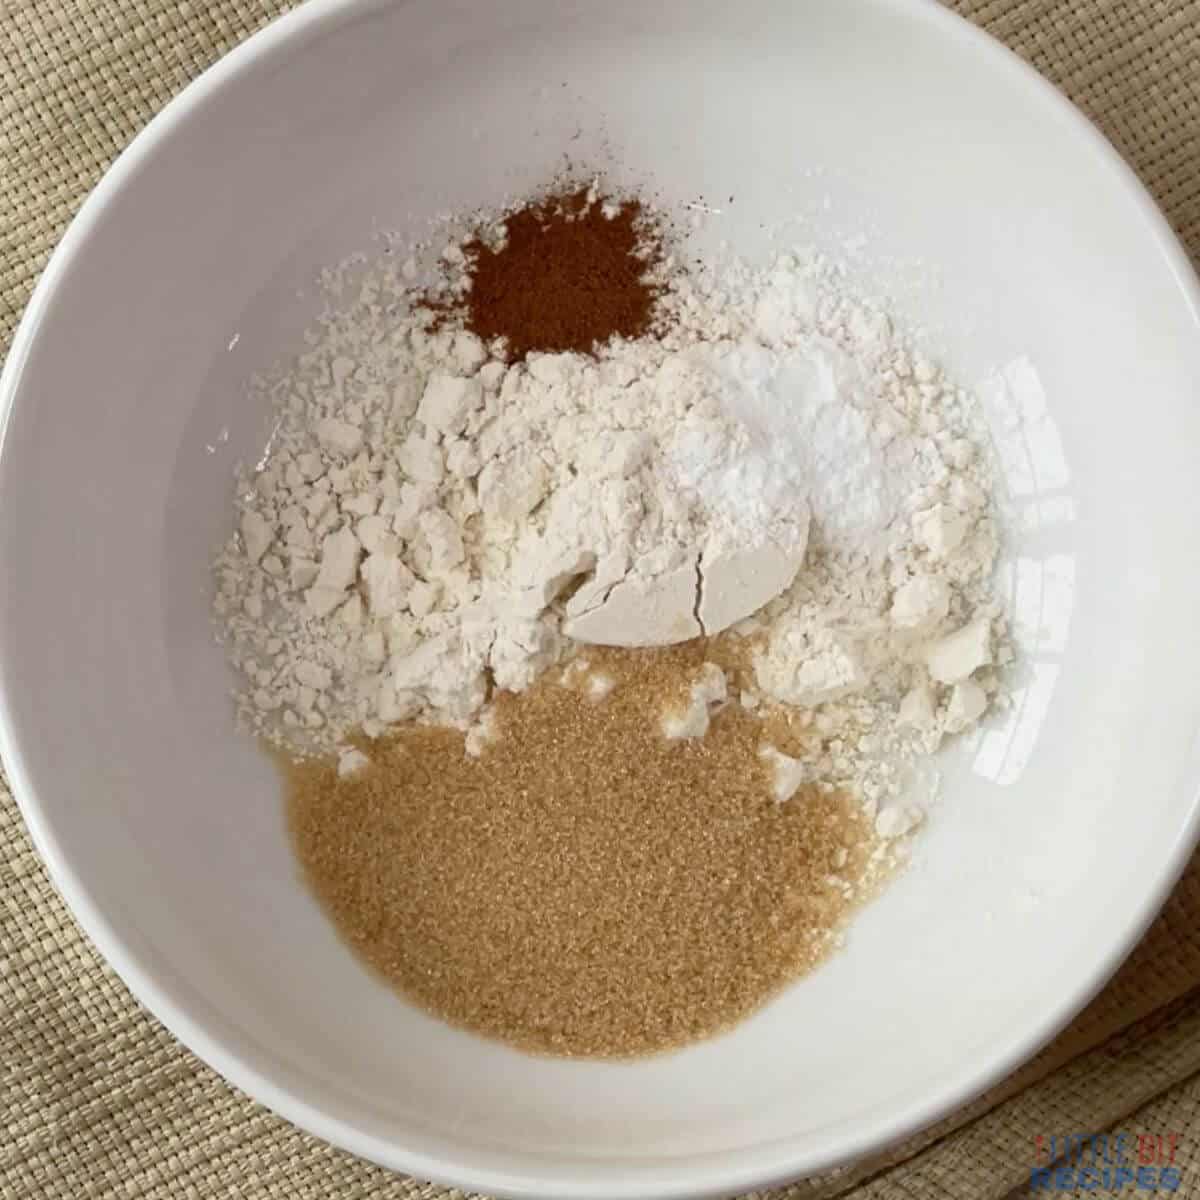 dry topping ingredients in mixing bowl.